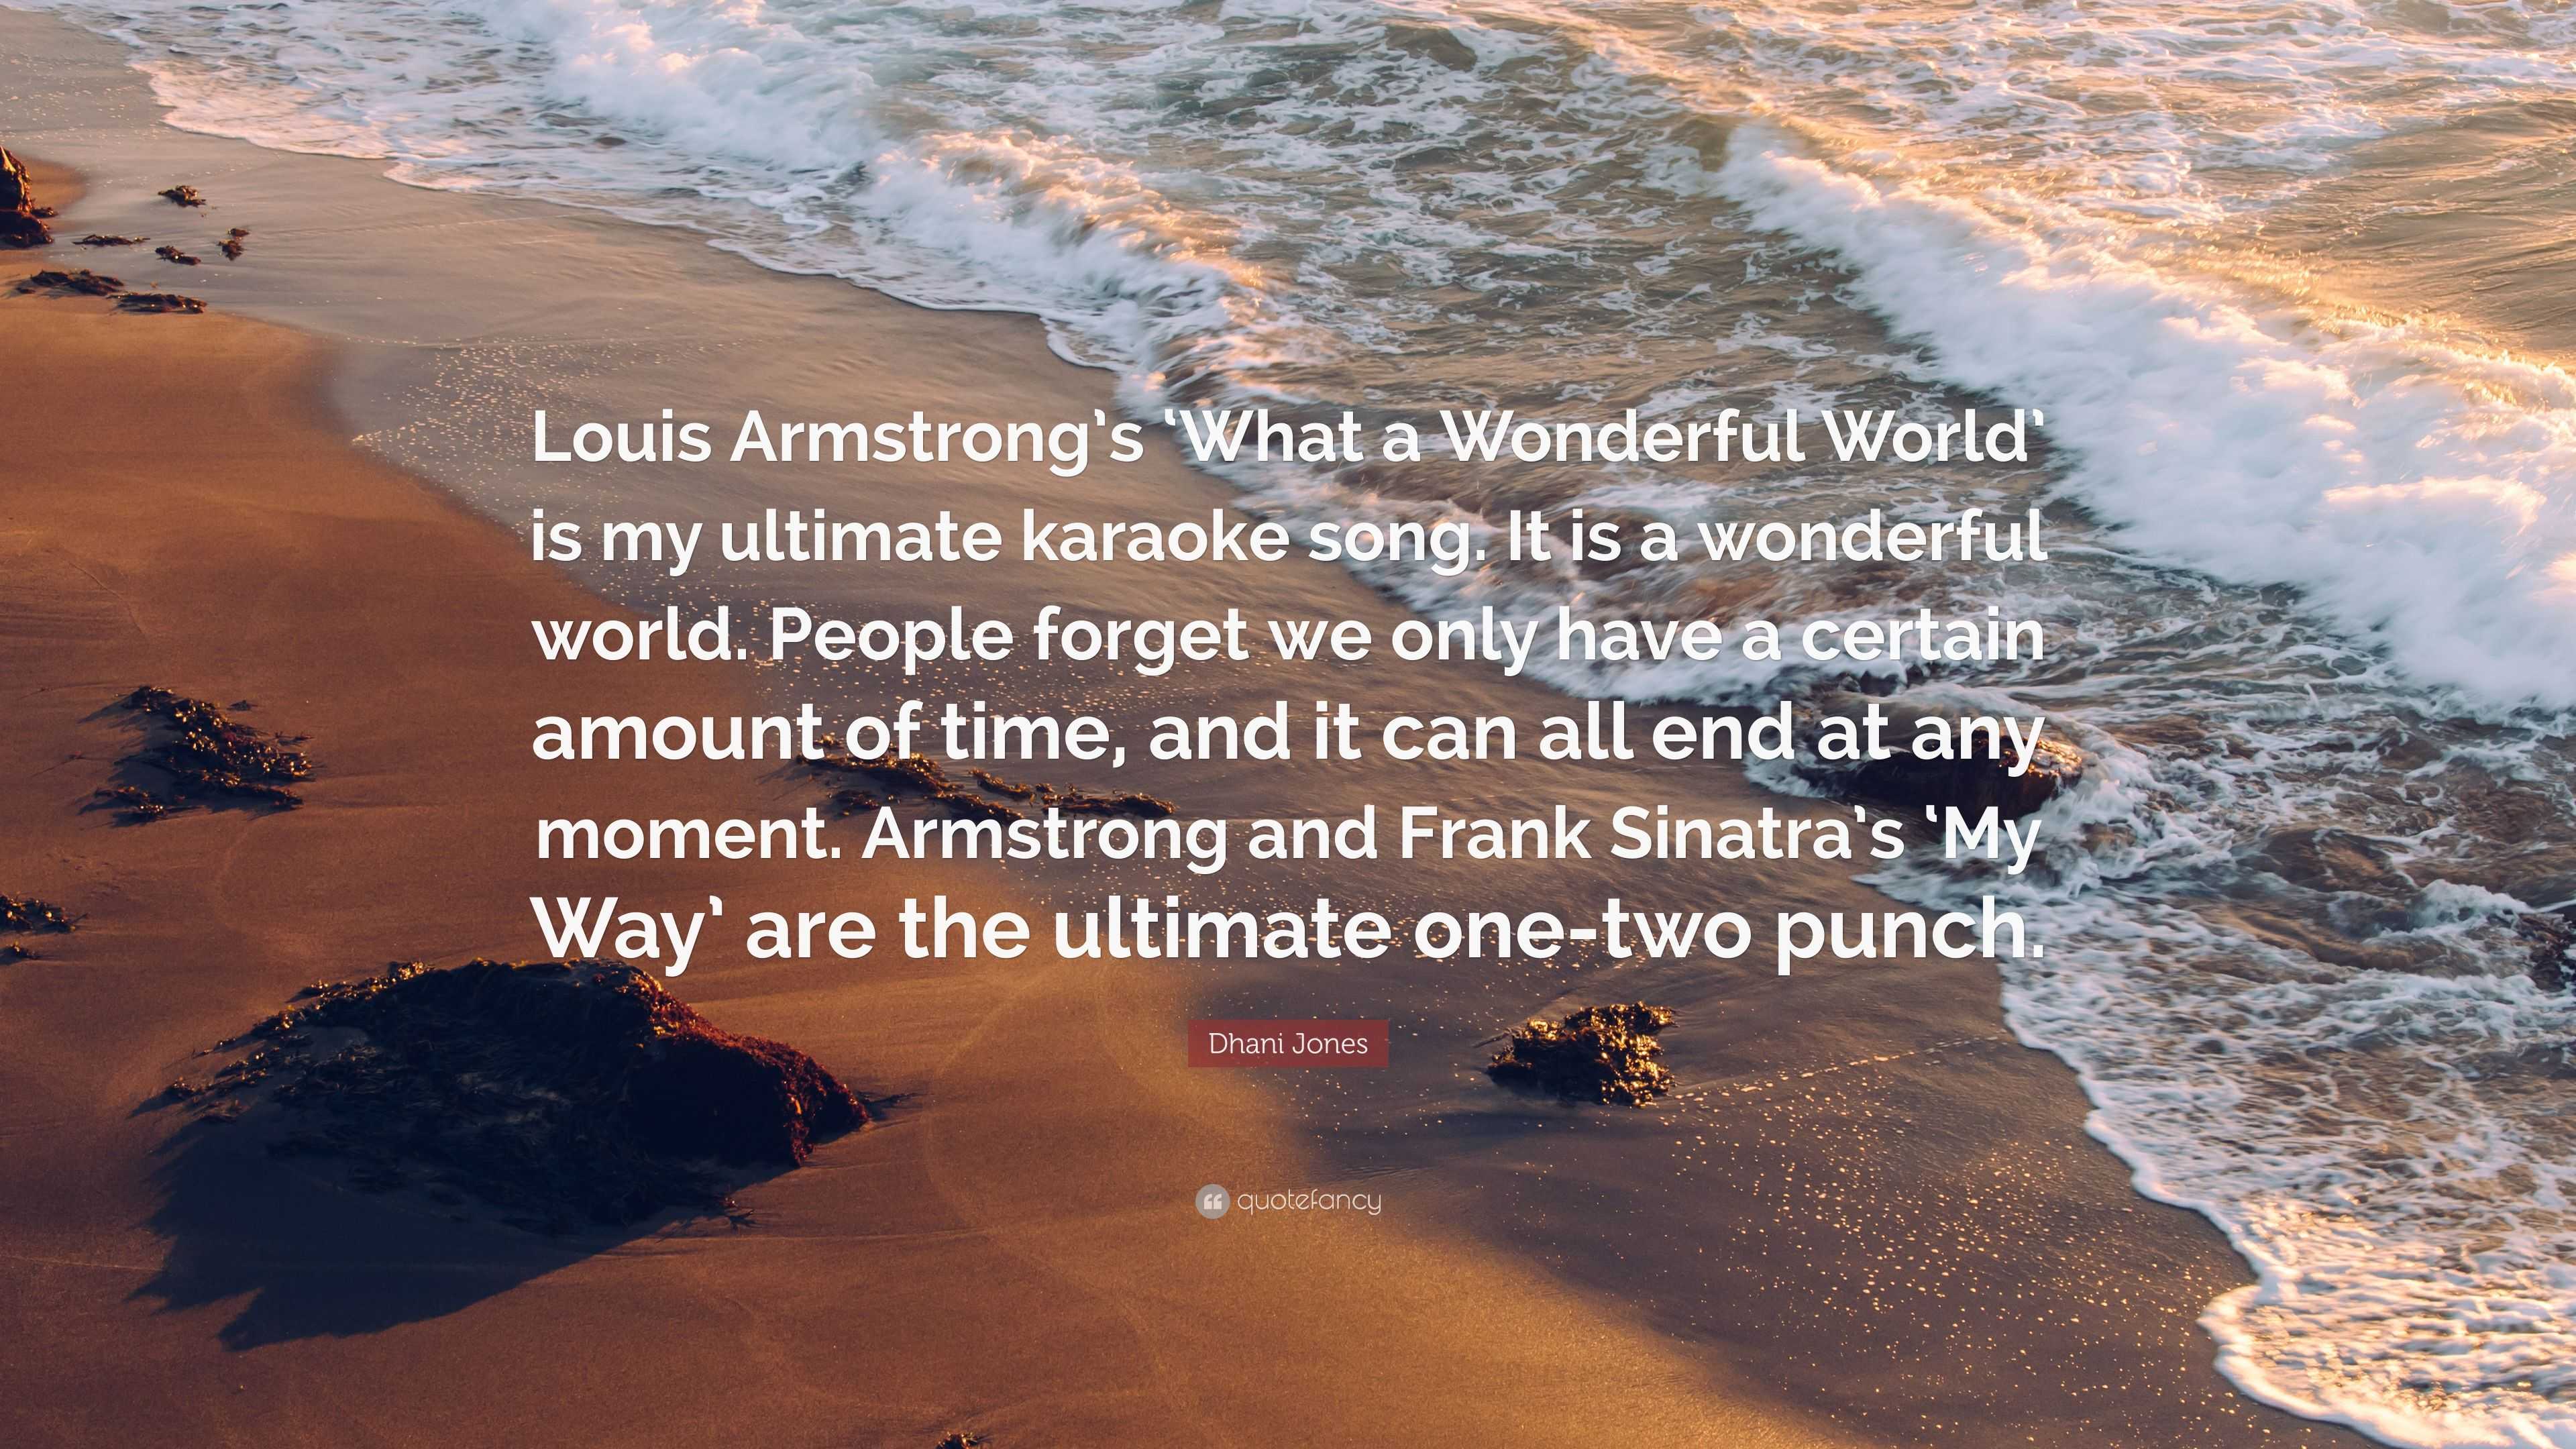 Dhani Jones Quote: “Louis Armstrong’s ‘What a Wonderful World’ is my ...